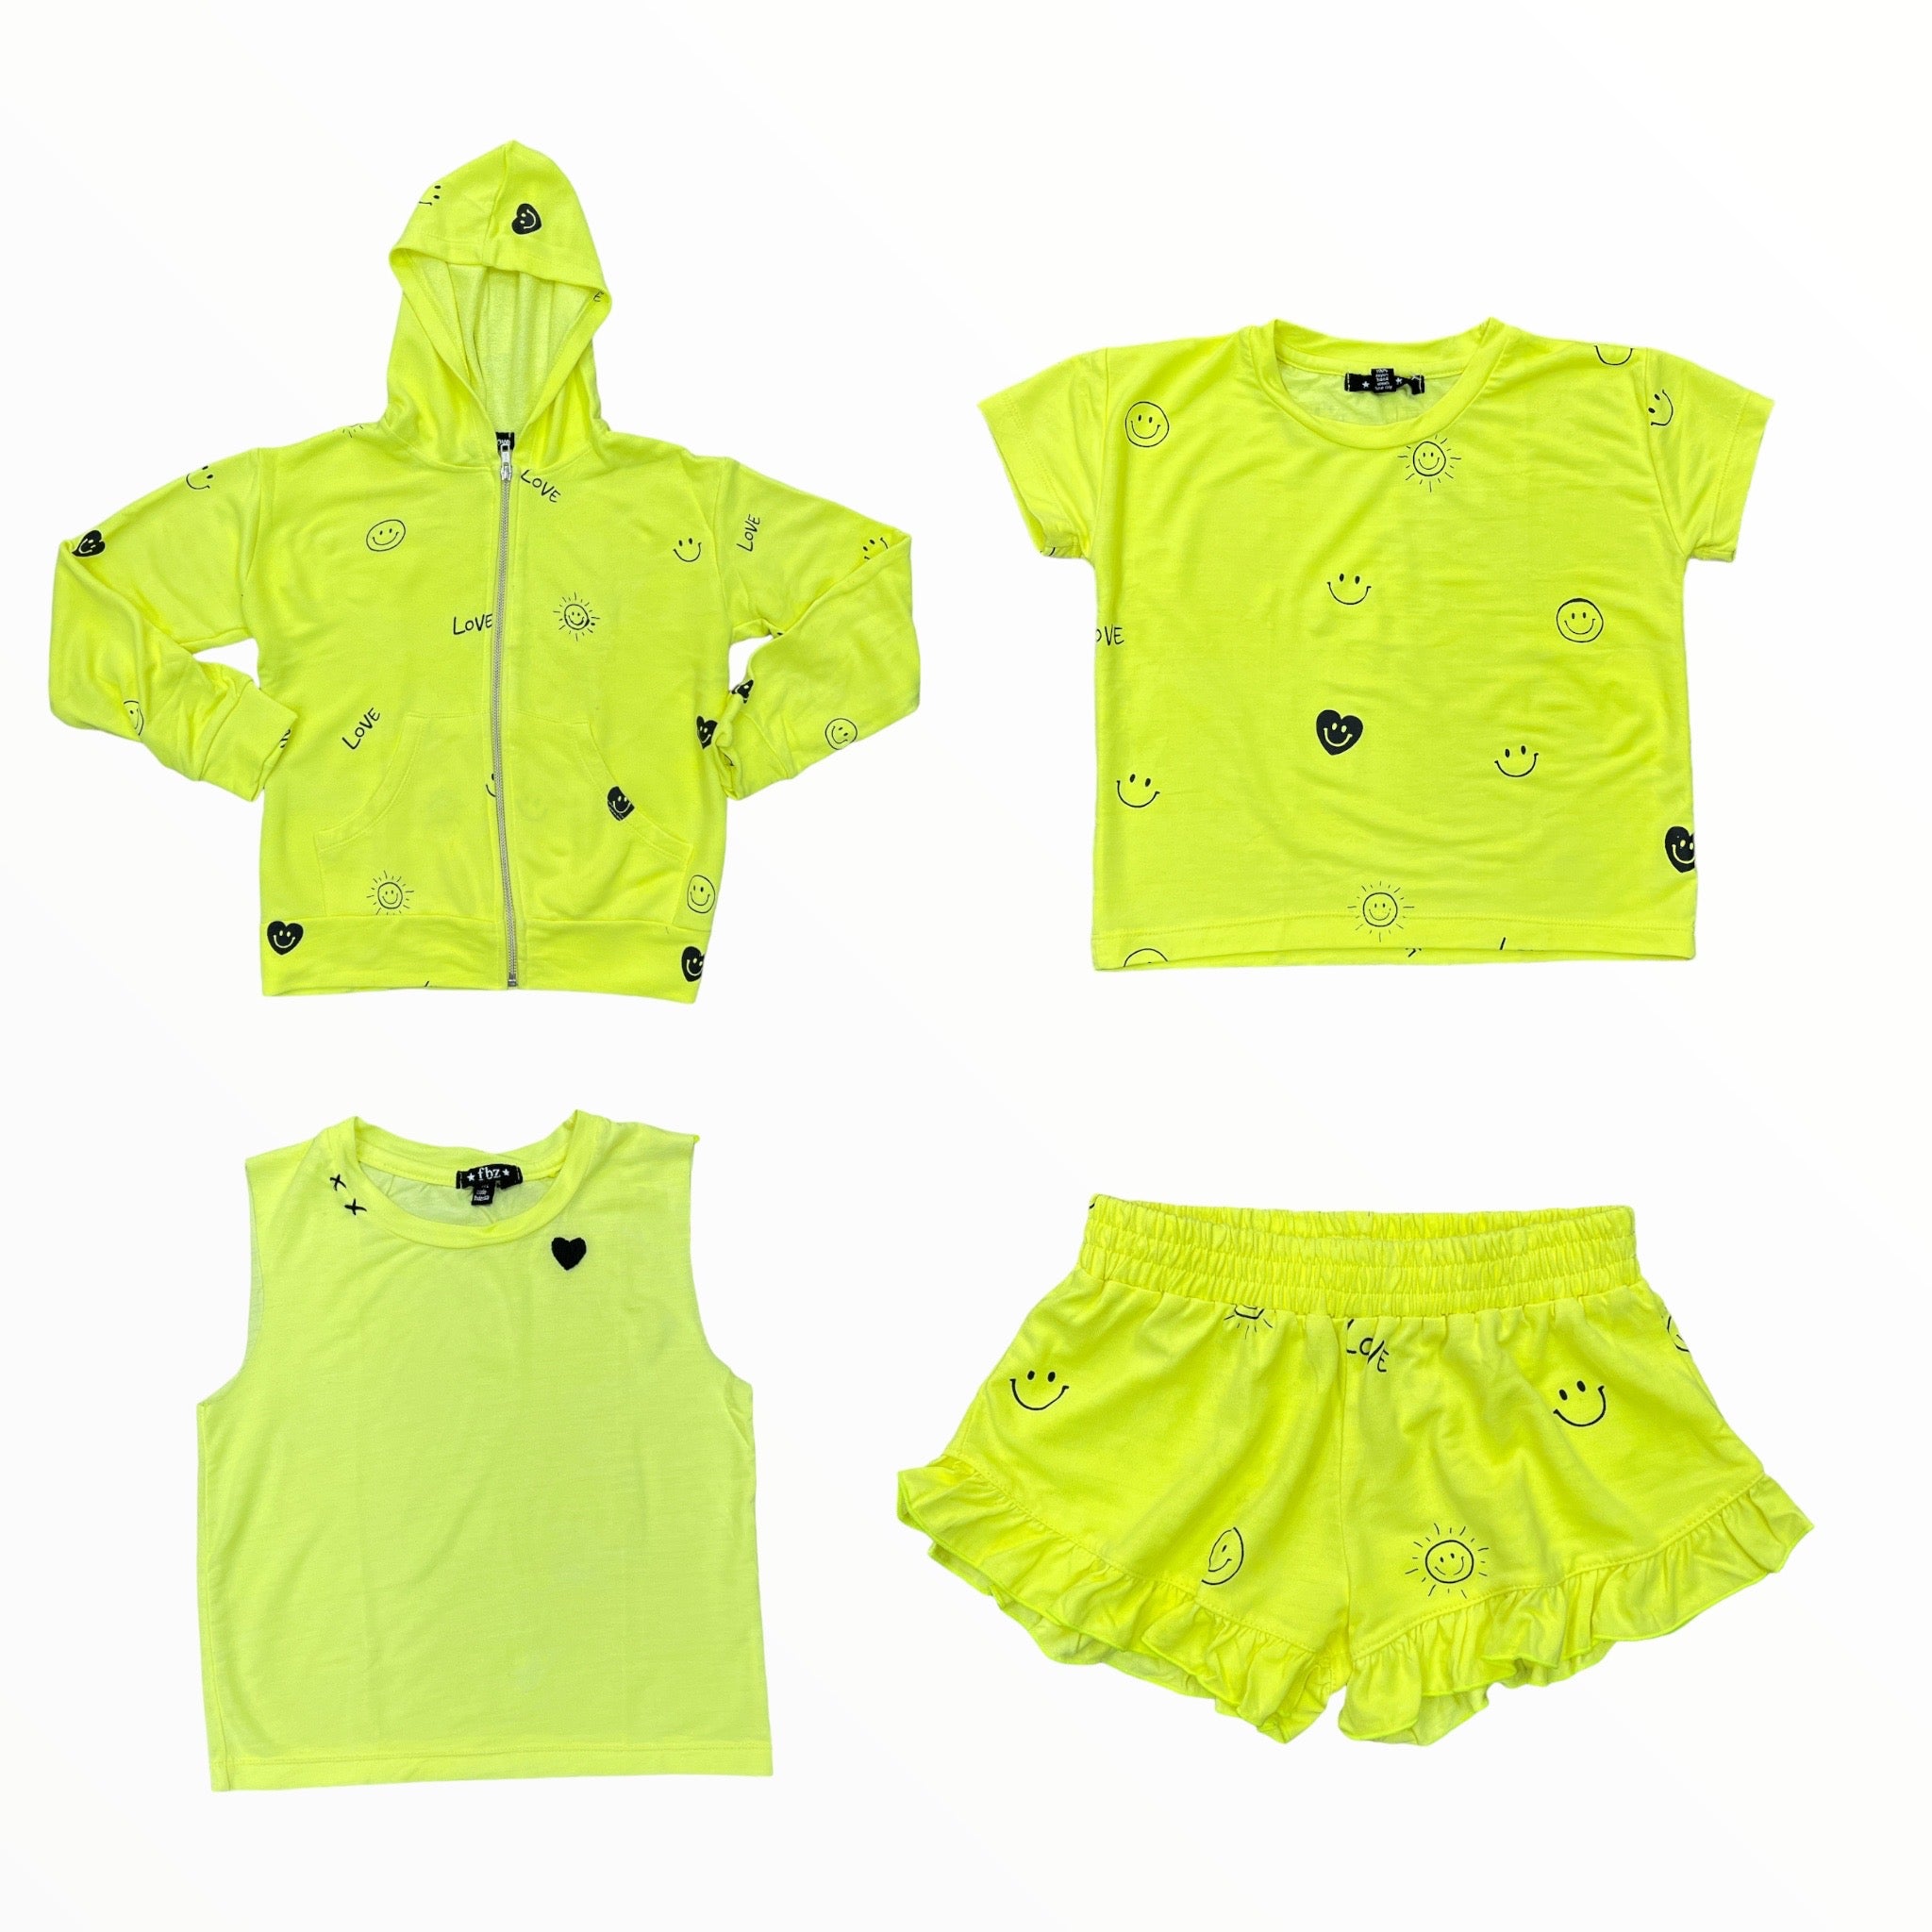 FLOWERS BY ZOE ZIP HOODIE - NEON YELLOW/ICON